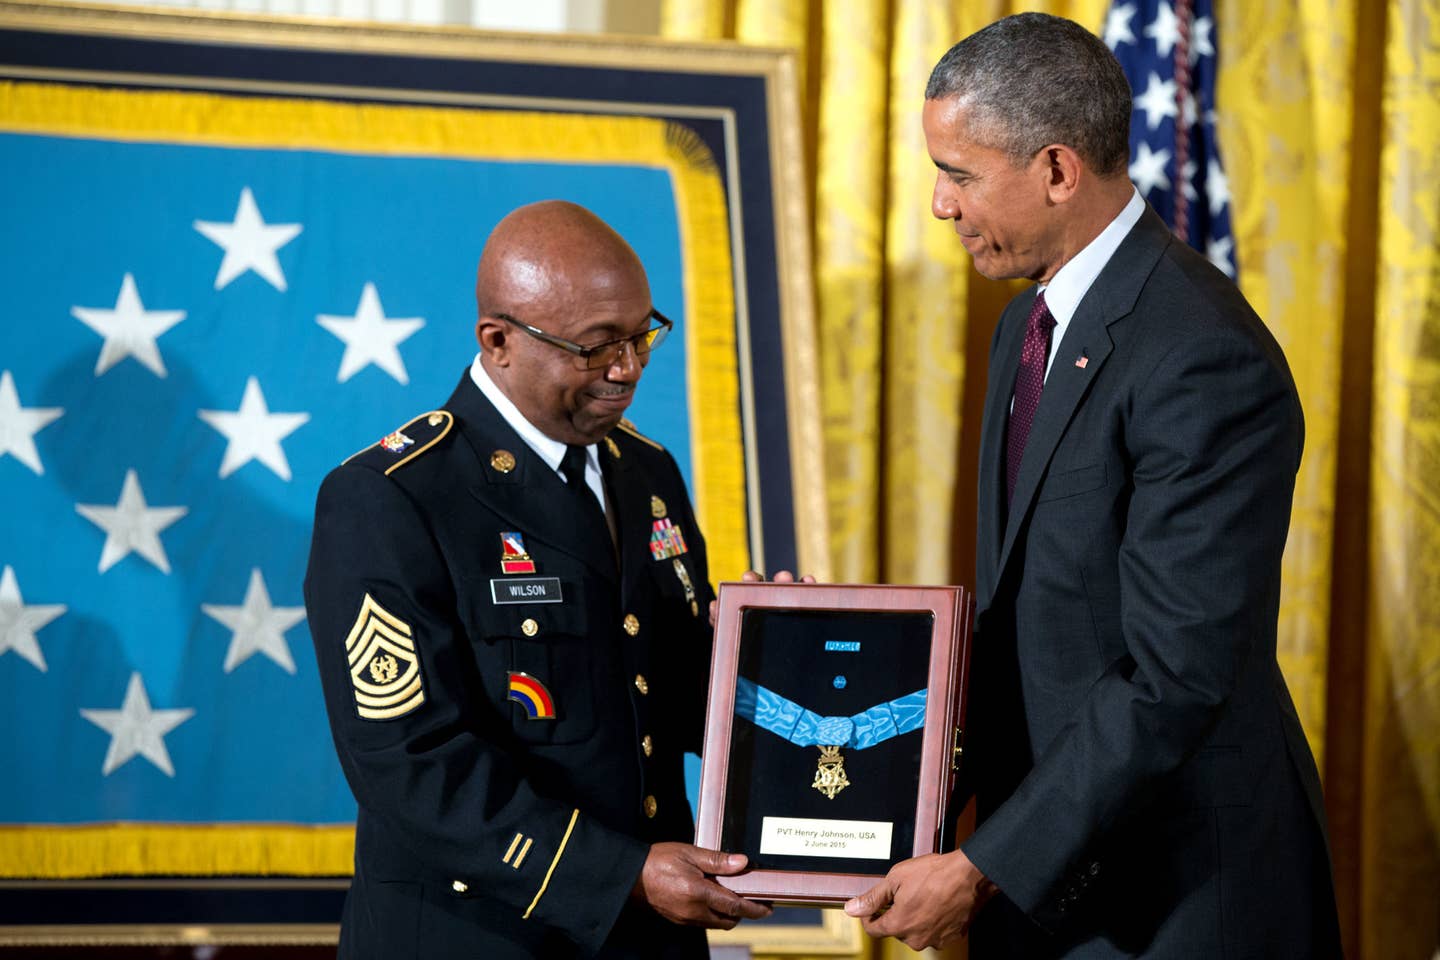 President Barack Obama awards the Medal of Honor posthumously to Army Private Henry Johnson. Command Sergeant Major Louis Wilson accepts the Medal of Honor. (Photo by Pete Souza)